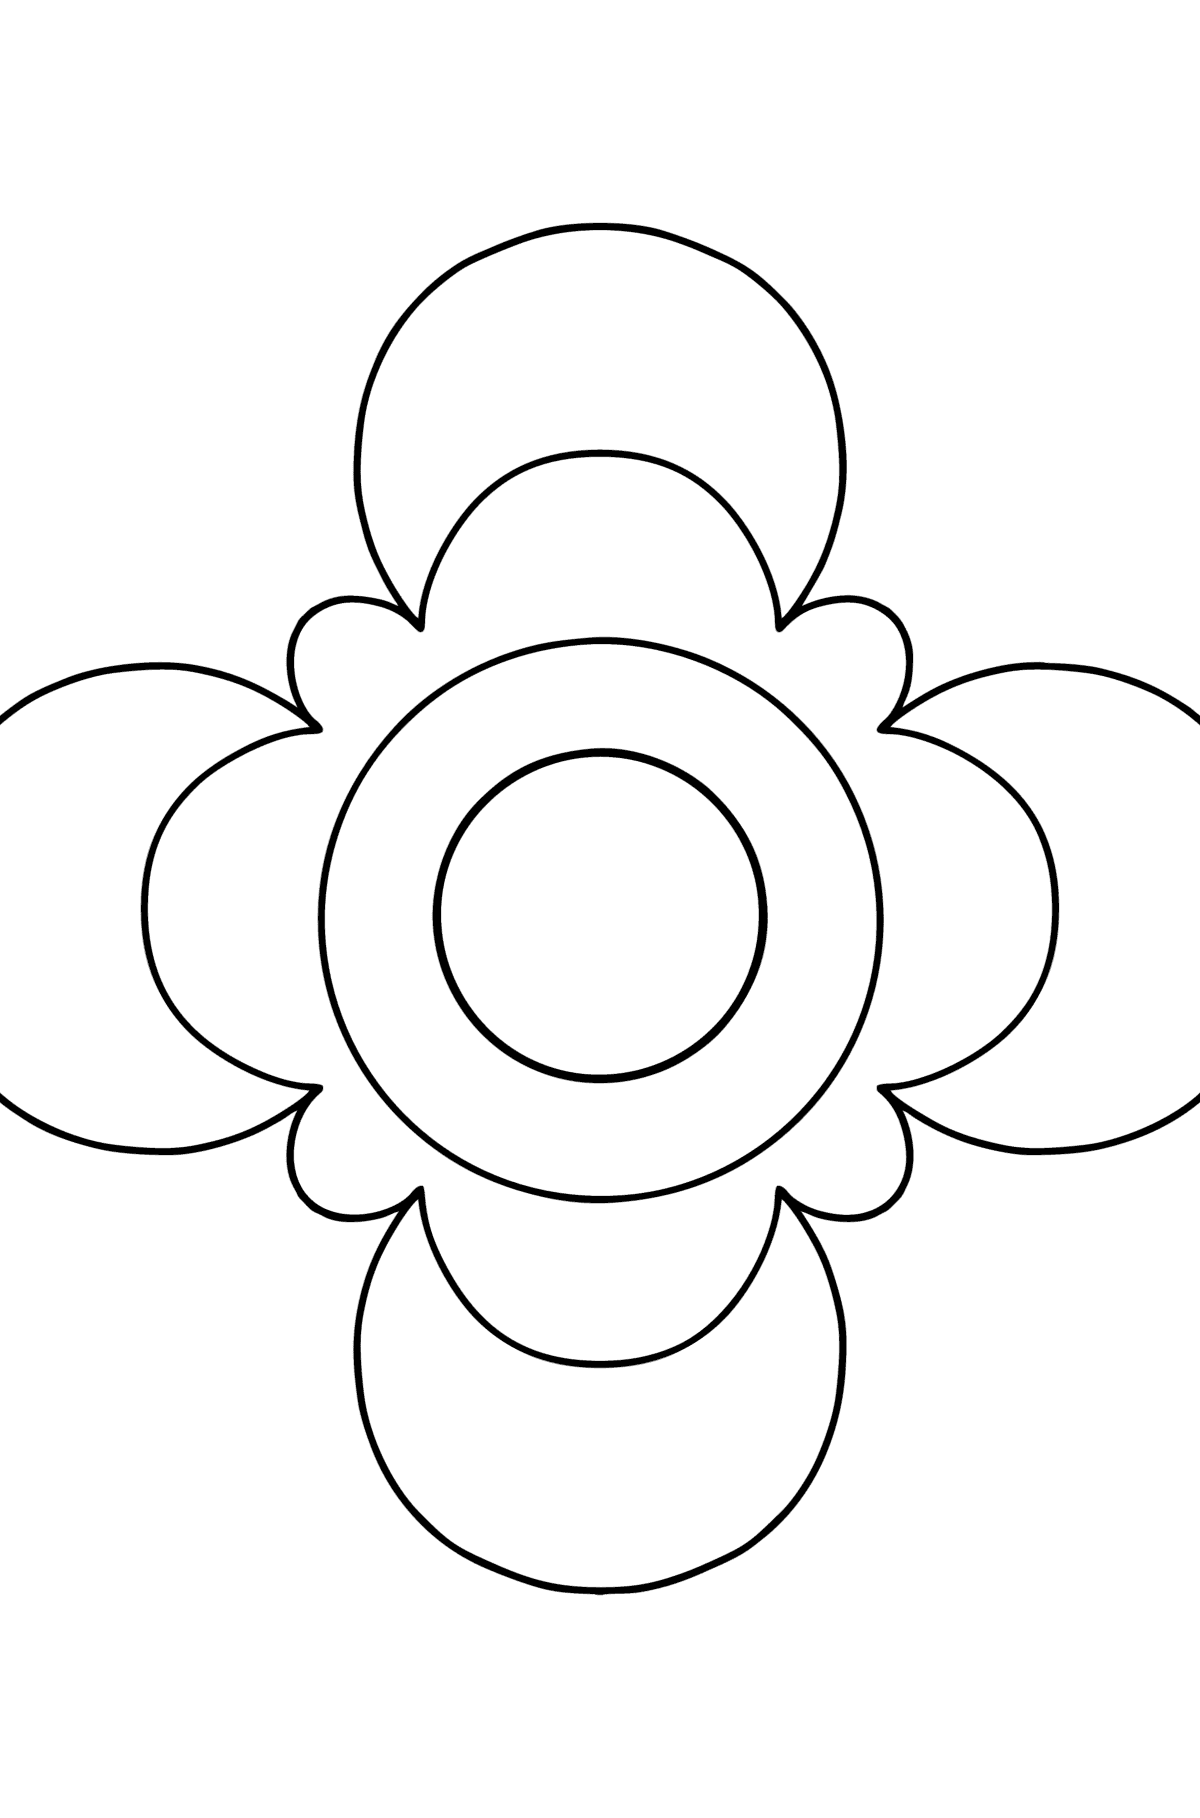 Coloring Anti stress flower for kids - Coloring Pages for Kids